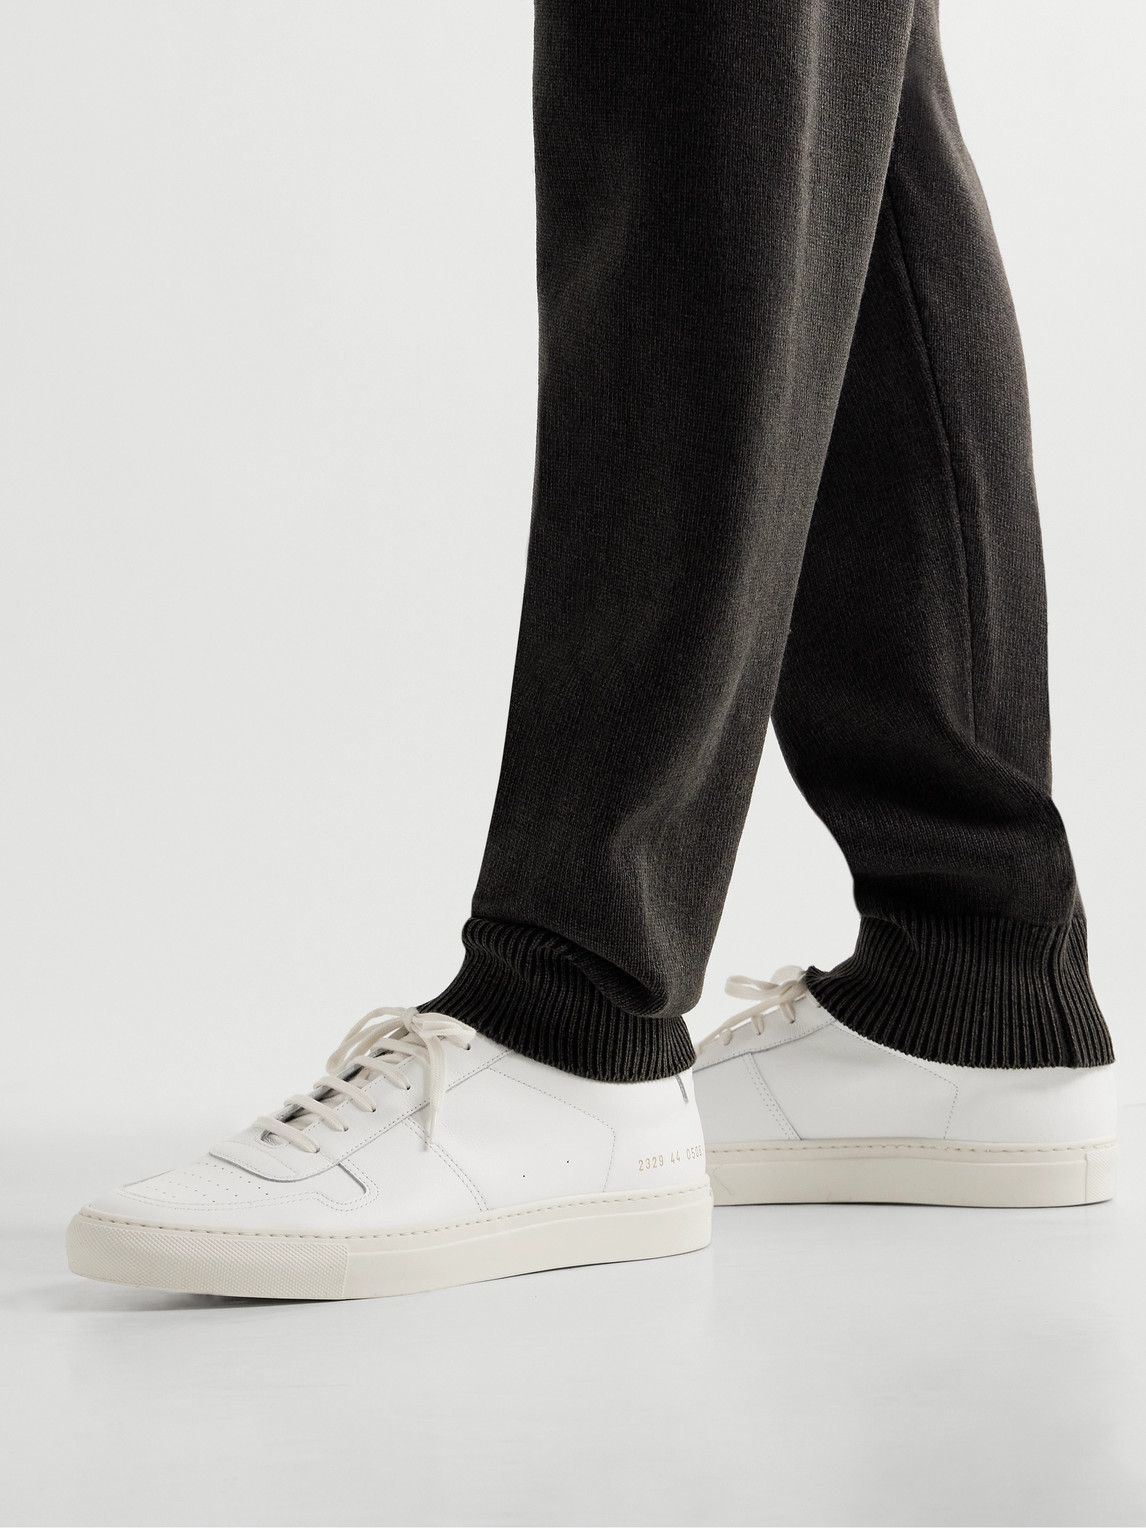 Common Projects - BBall Leather Sneakers - White Common Projects